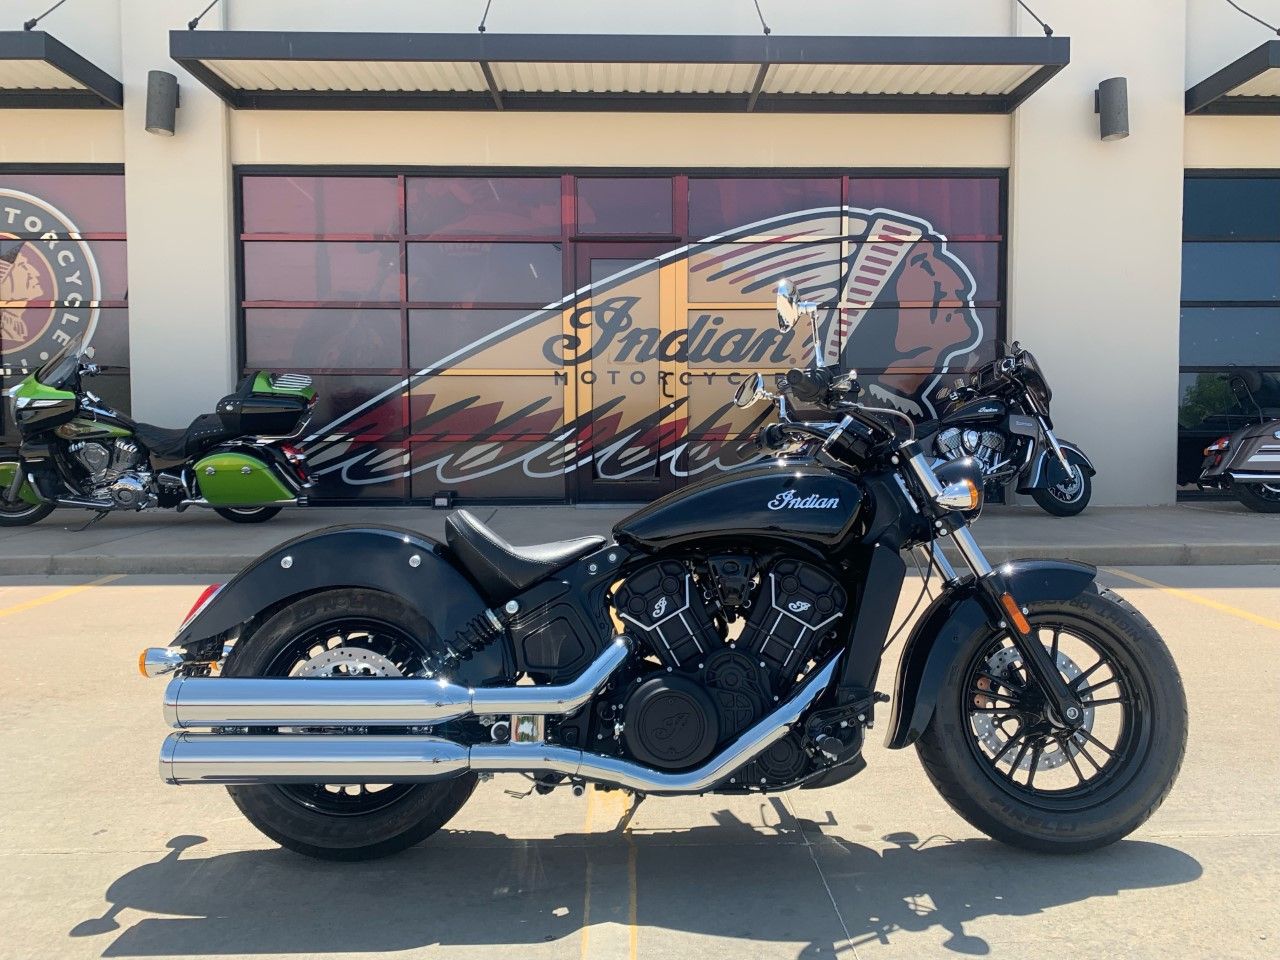 2022 Indian Scout® Sixty in Norman, Oklahoma - Photo 1